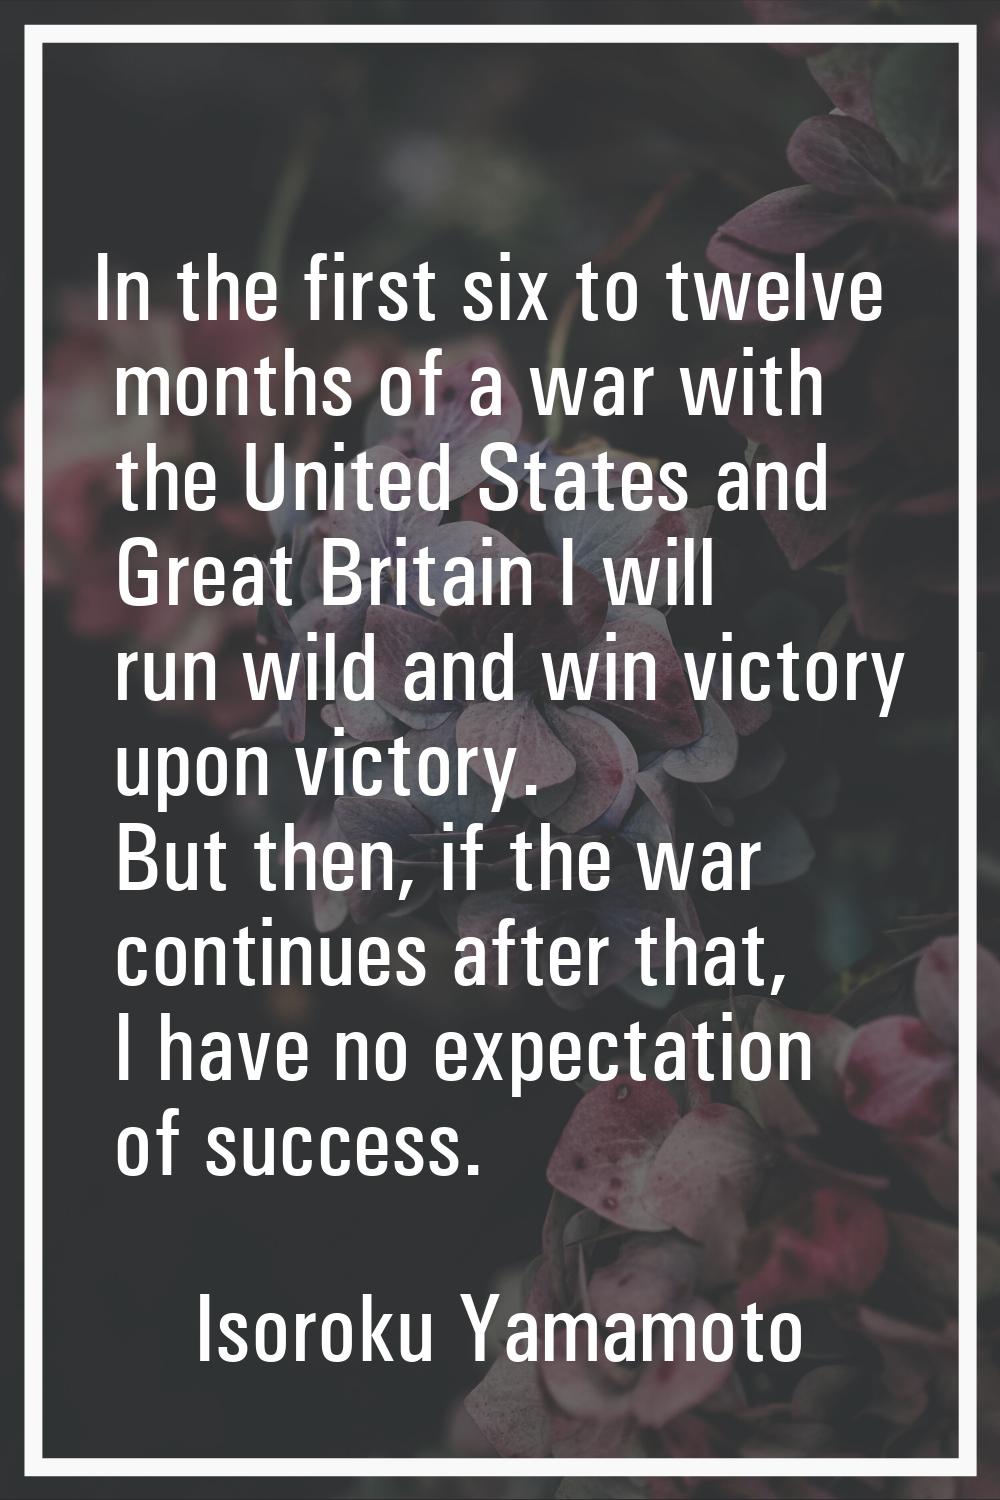 In the first six to twelve months of a war with the United States and Great Britain I will run wild